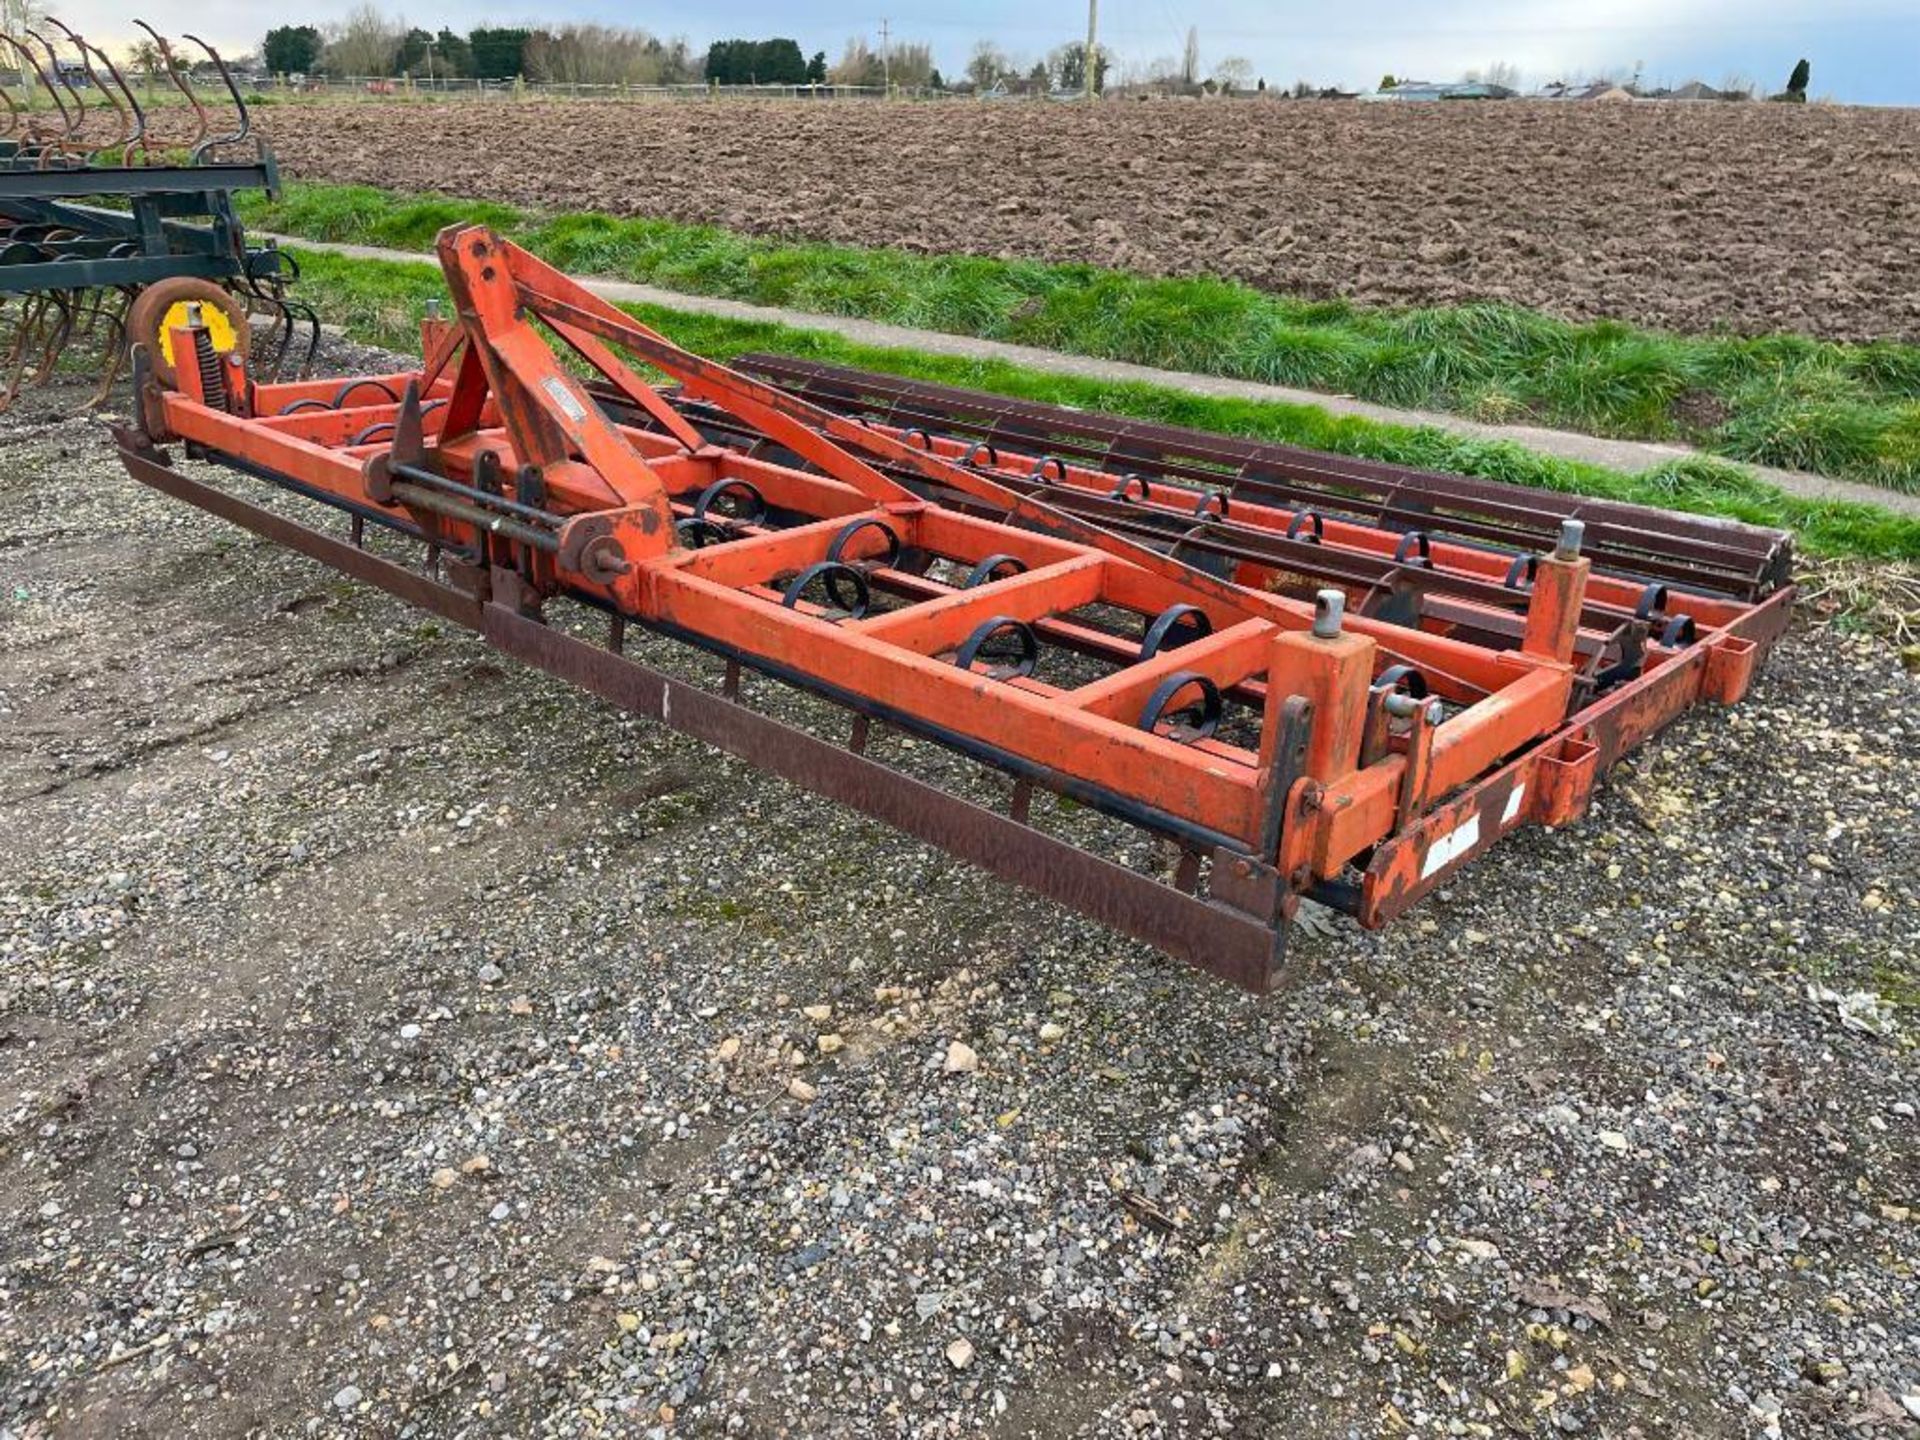 Kombi spring tine cultivator 4m with 2 crumbler rollers - Image 2 of 5